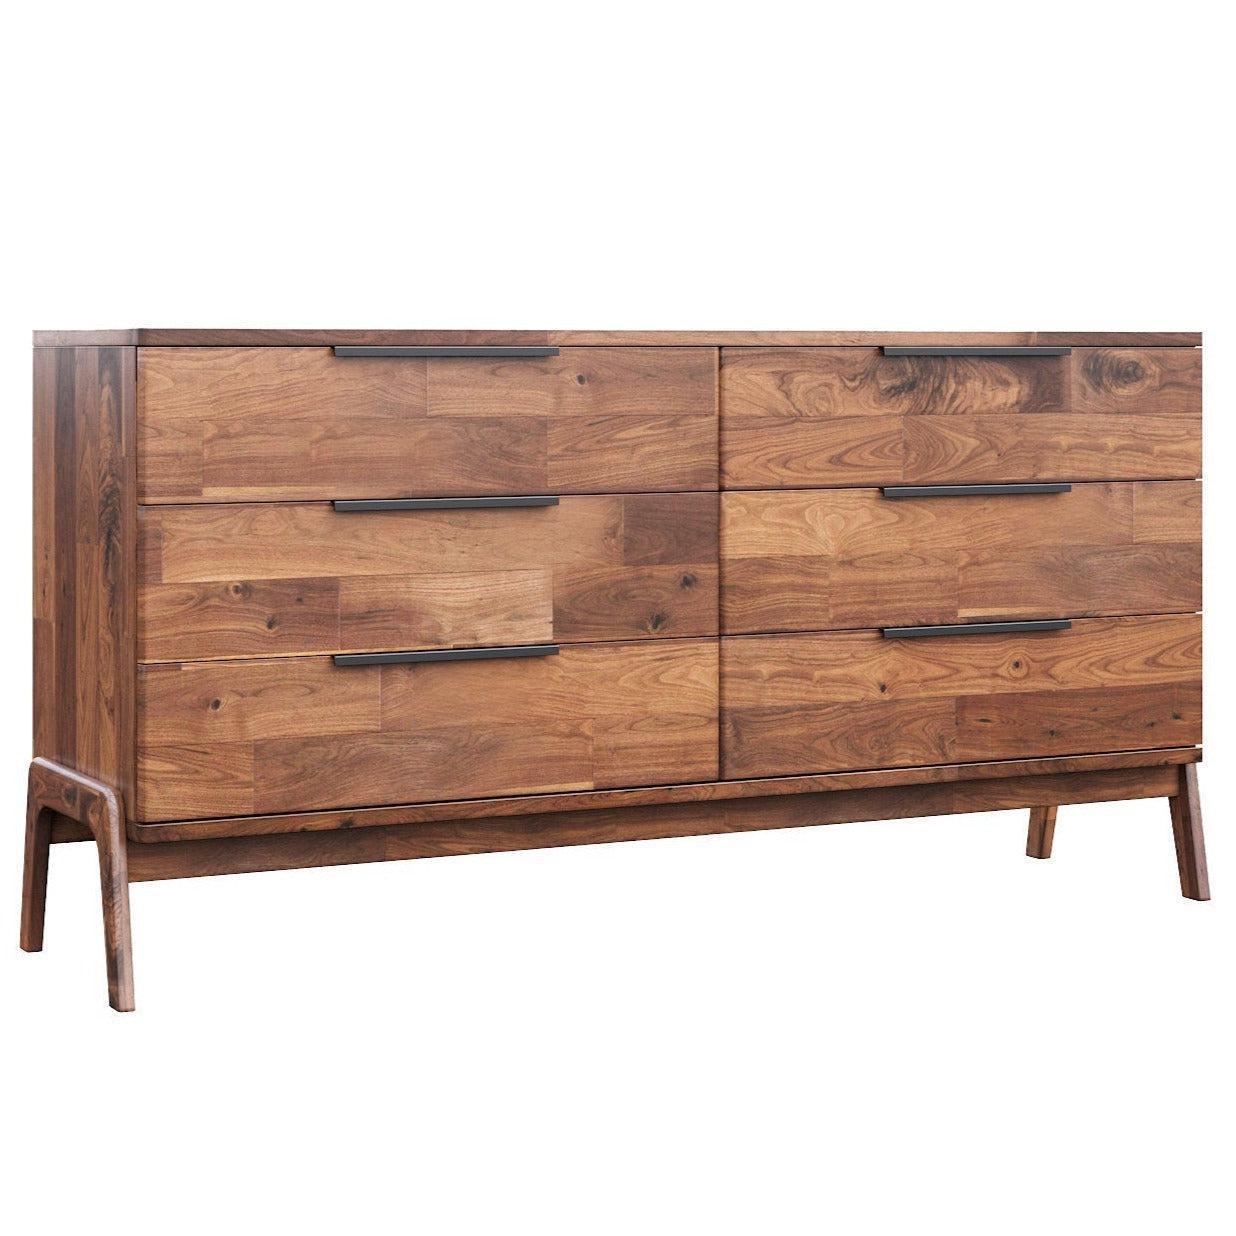 Natural Brown Solid Wood Frame Remix 6 Drawer Dresser - Sideboards and Things Accents_Natural, Brand_LH Imports, Color_Brown, Wood Species_Acacia